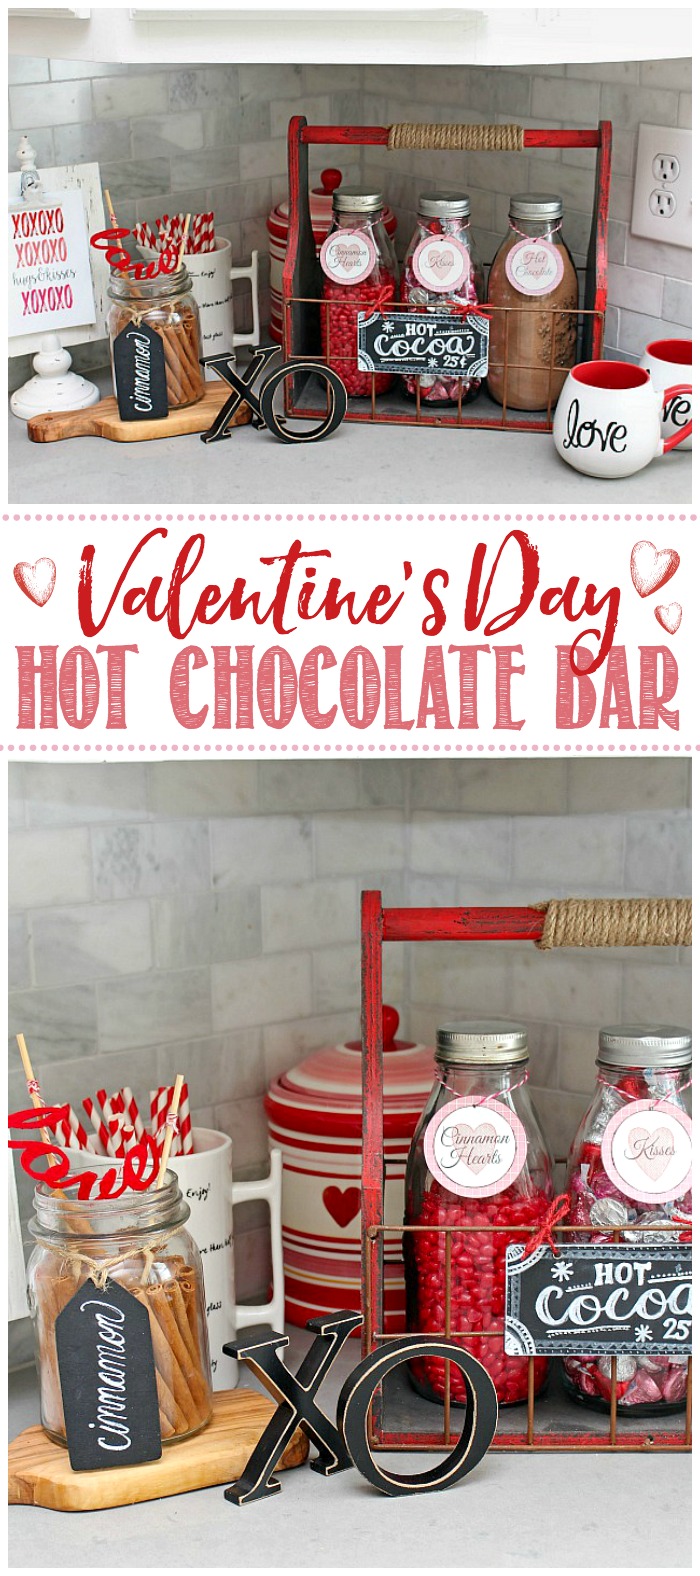 Hot Chocolate Recipes and Valentine's Day Hot Chocolate Bar - Clean and ...